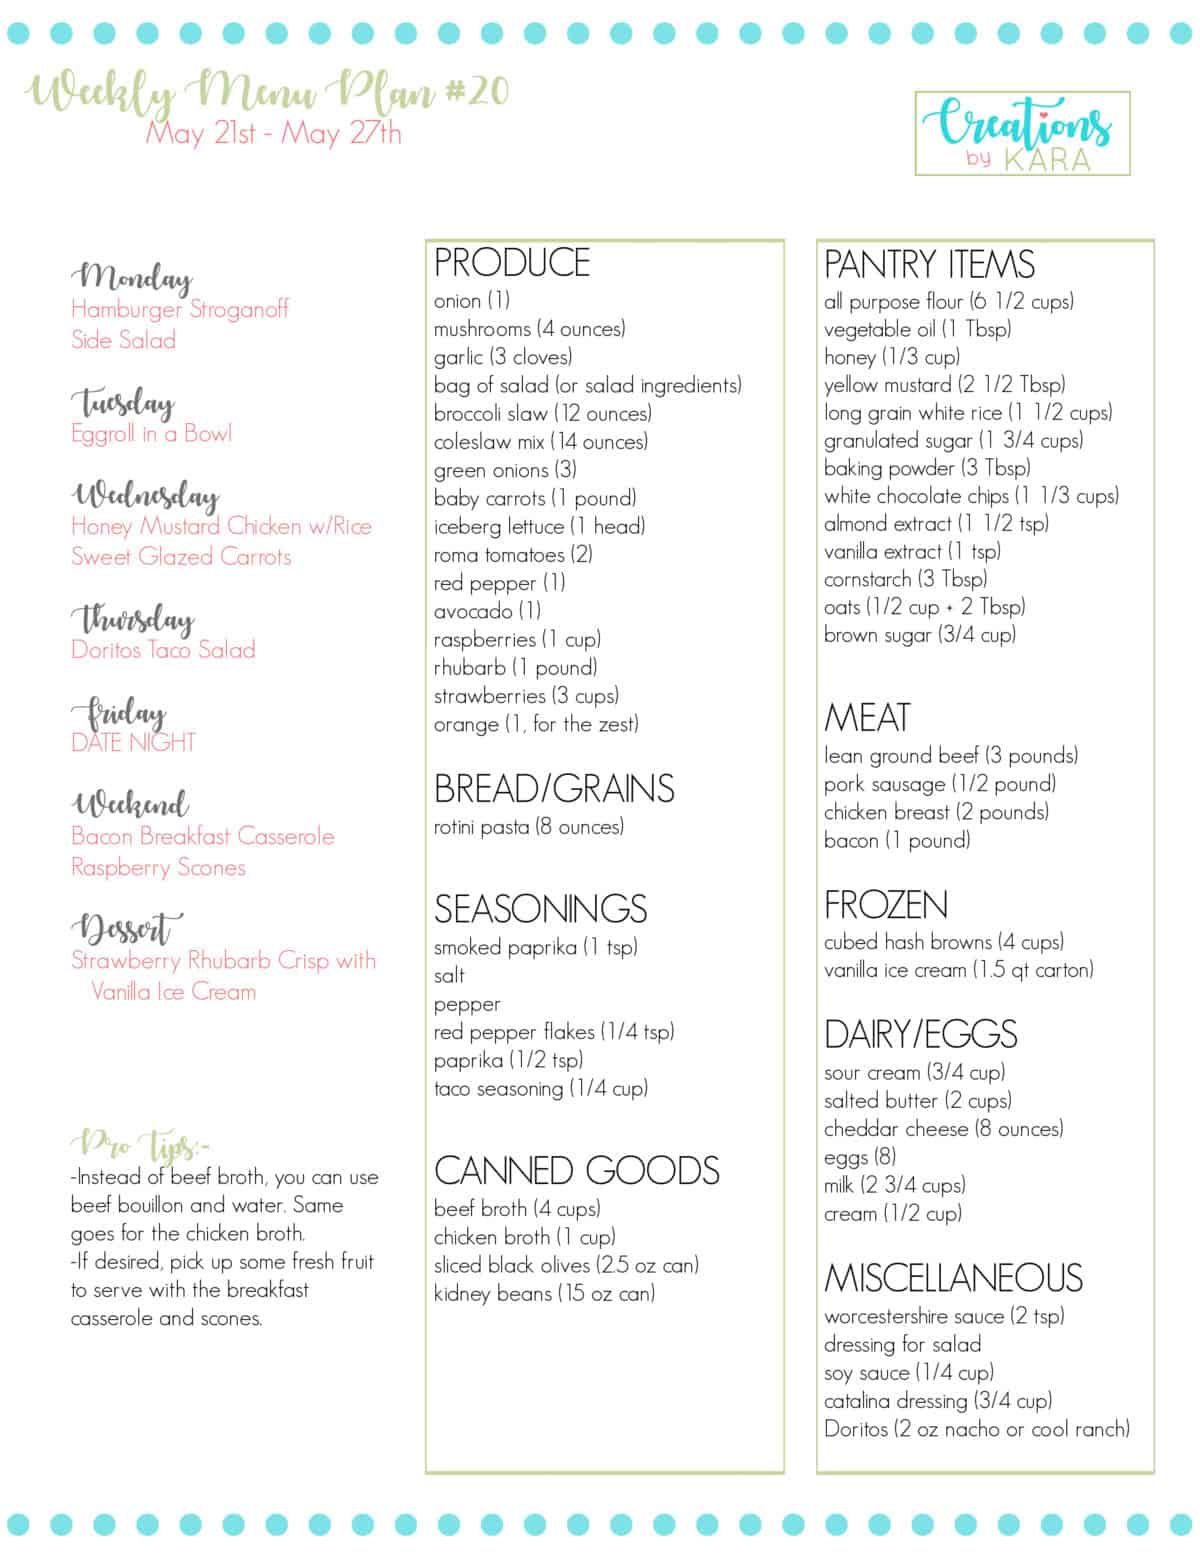 shopping list for weekly meal plan #20